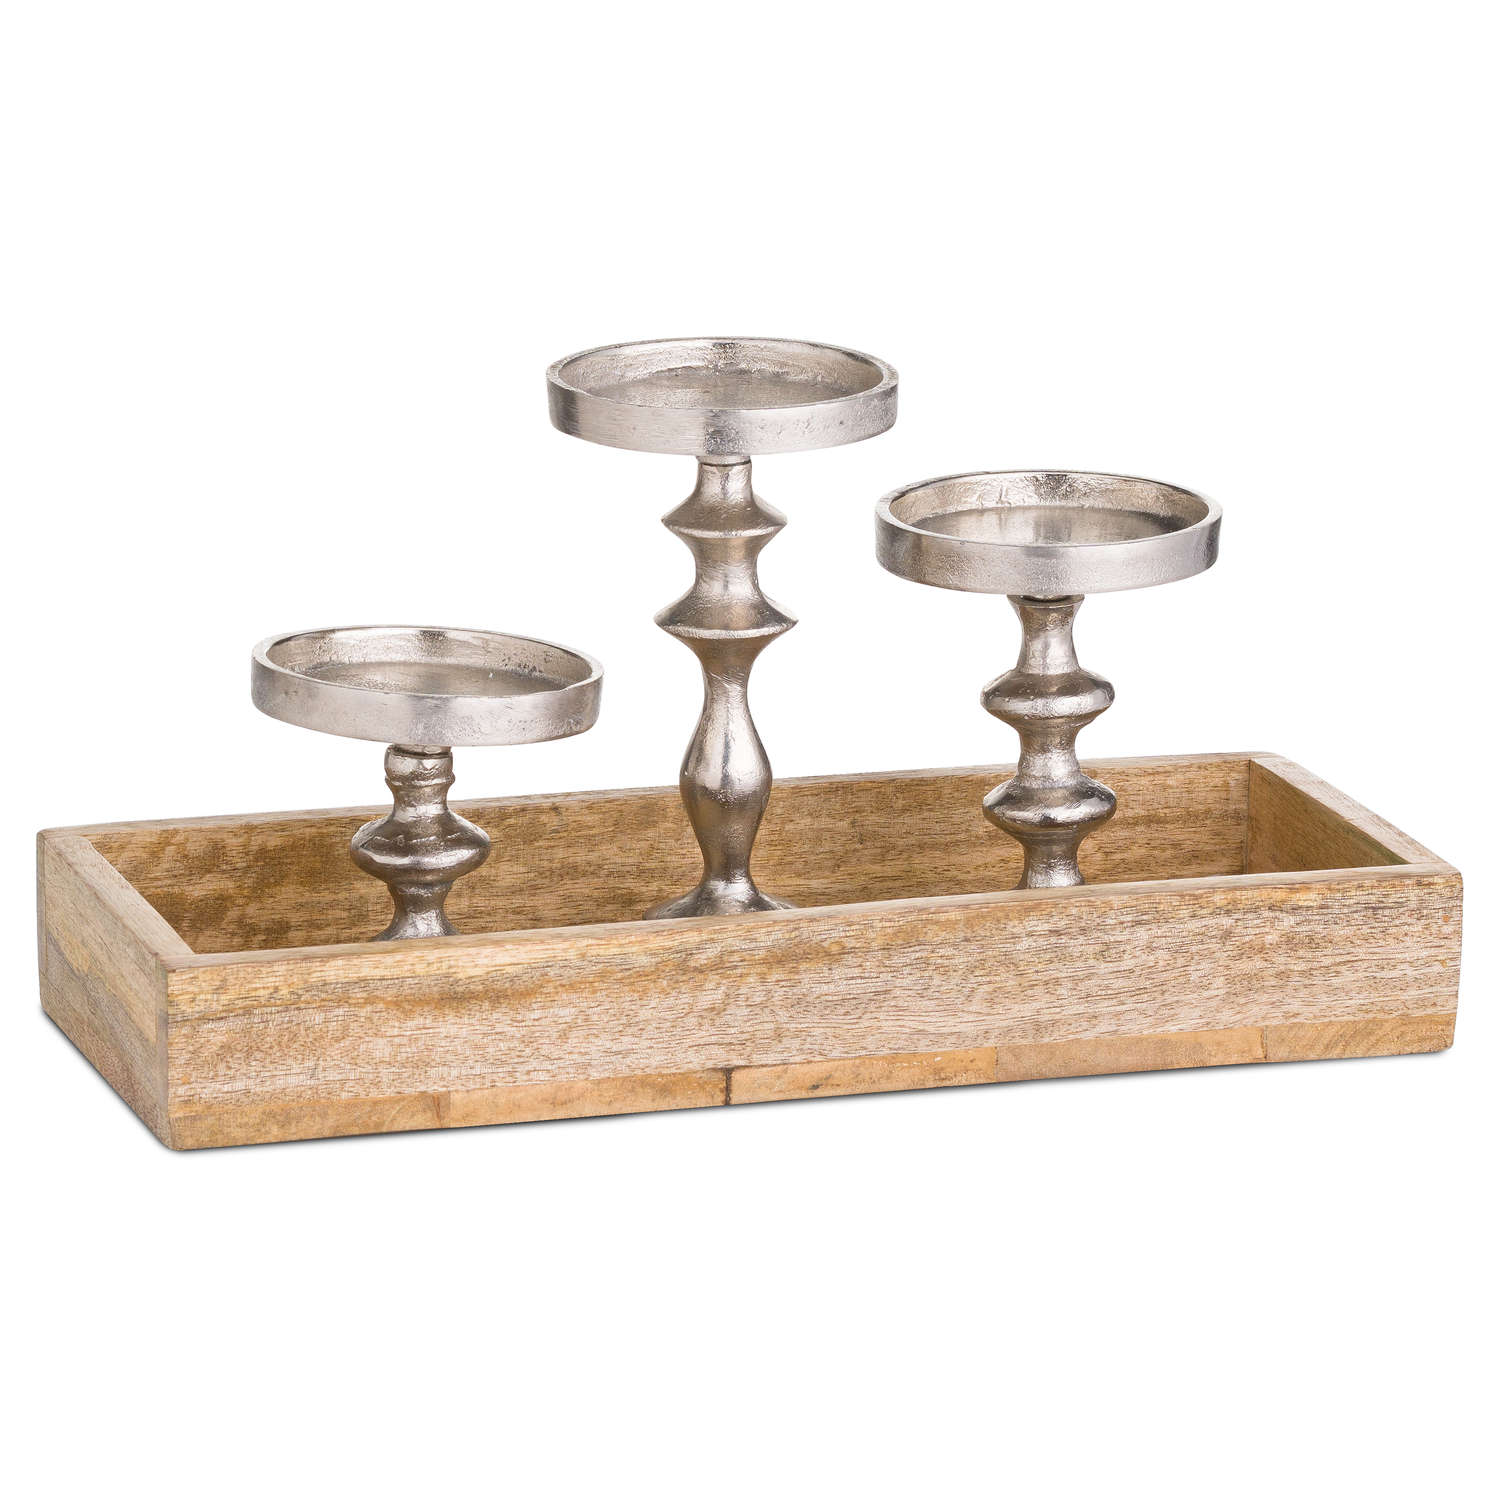 Hardwood Display Tray With Three Candle Holders